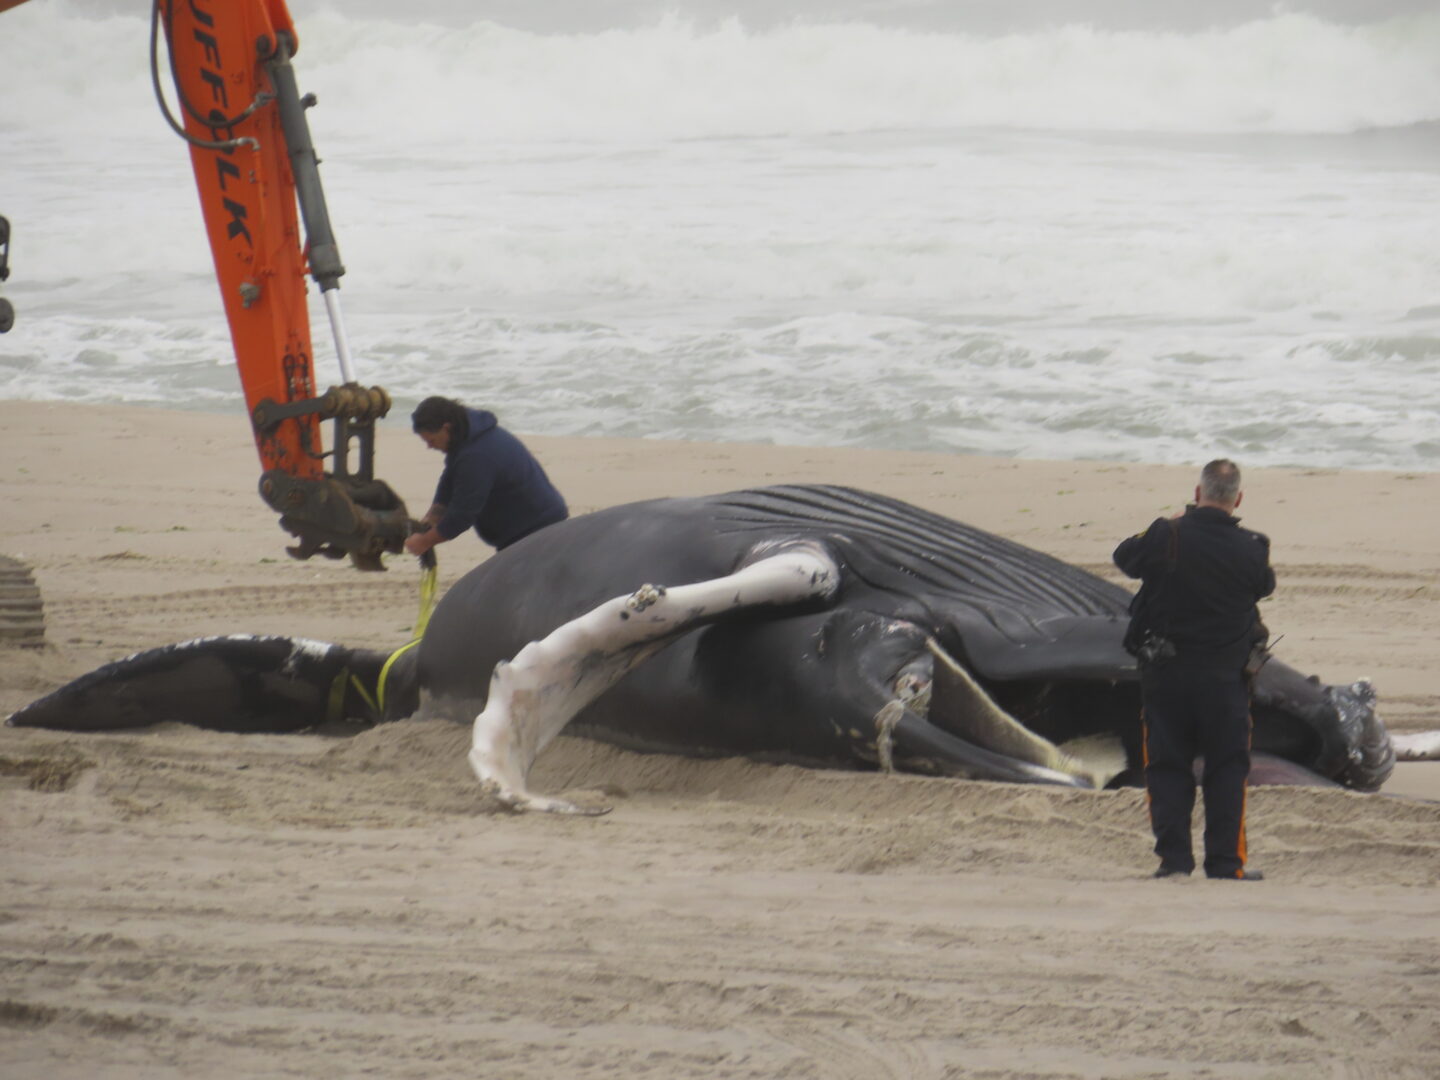 A dead humpback whale lies on the beach in Seaside Park, N.J., on March 2, 2023. Republican Congressmen on Thursday, March, 16, 2023, called for a halt to all offshore wind power projects amid a spate of whale deaths on the U.S. East Coast in what could be the beginning of an expected campaign by the GOP-controlled house to investigate the Biden Administration's clean energy plans. (AP Photo/Wayne Parry)